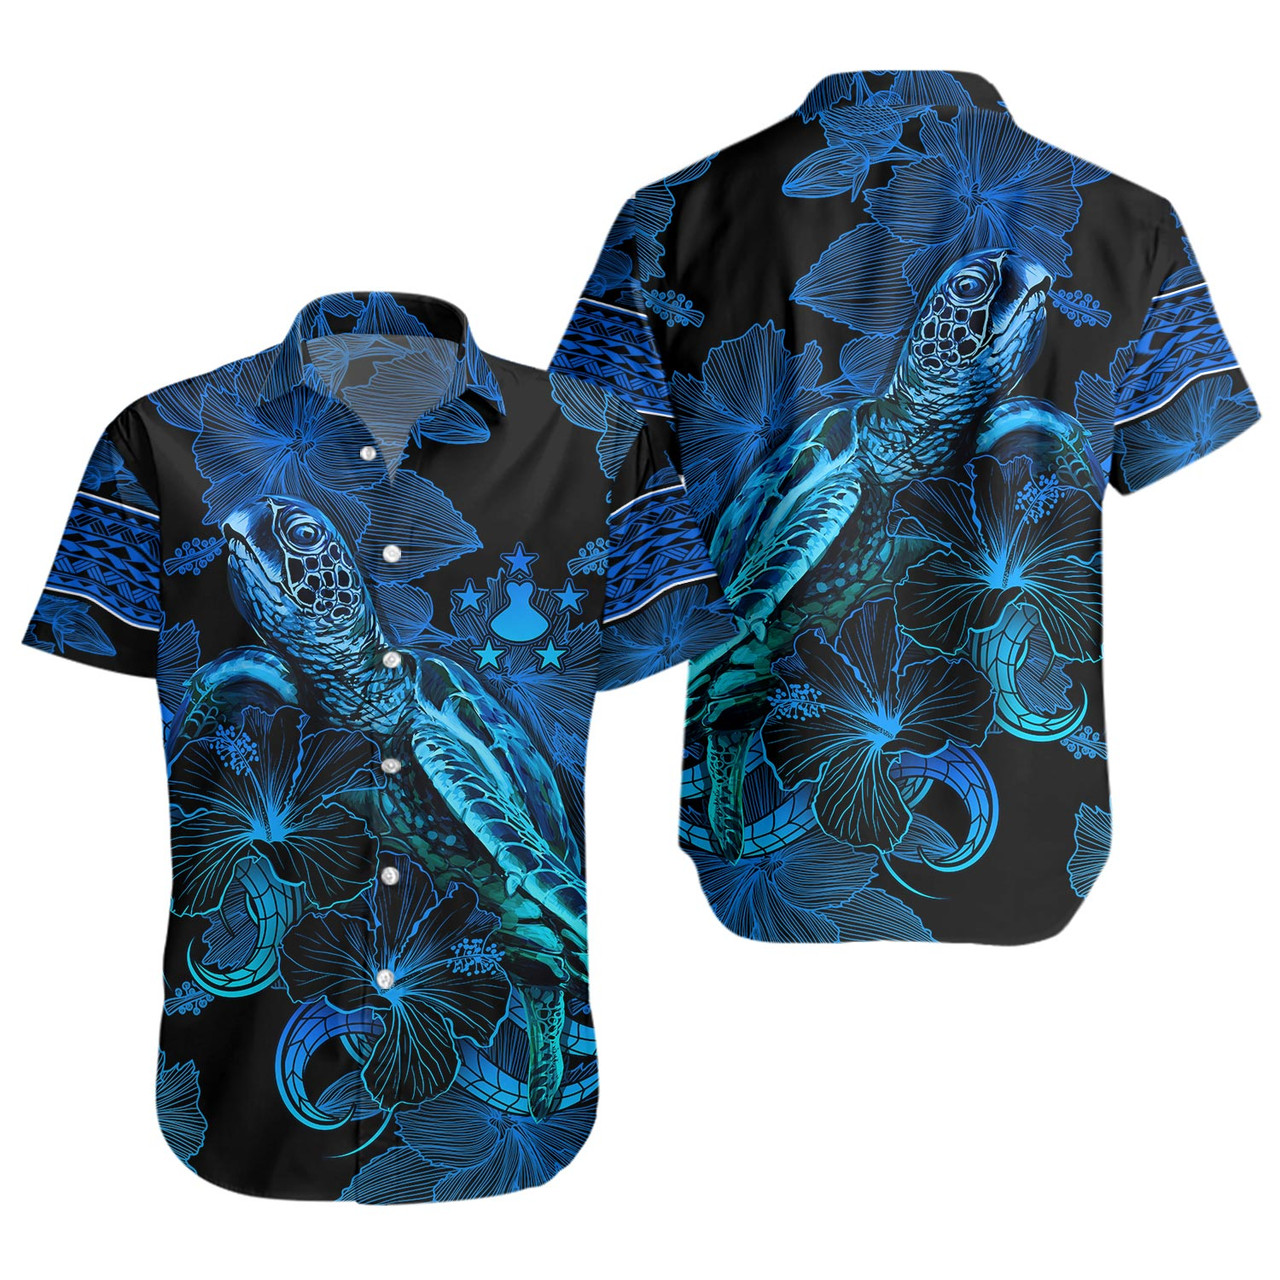 Austral Islands Short Sleeve Shirt Sea Turtle With Blooming Hibiscus Flowers Tribal Blue